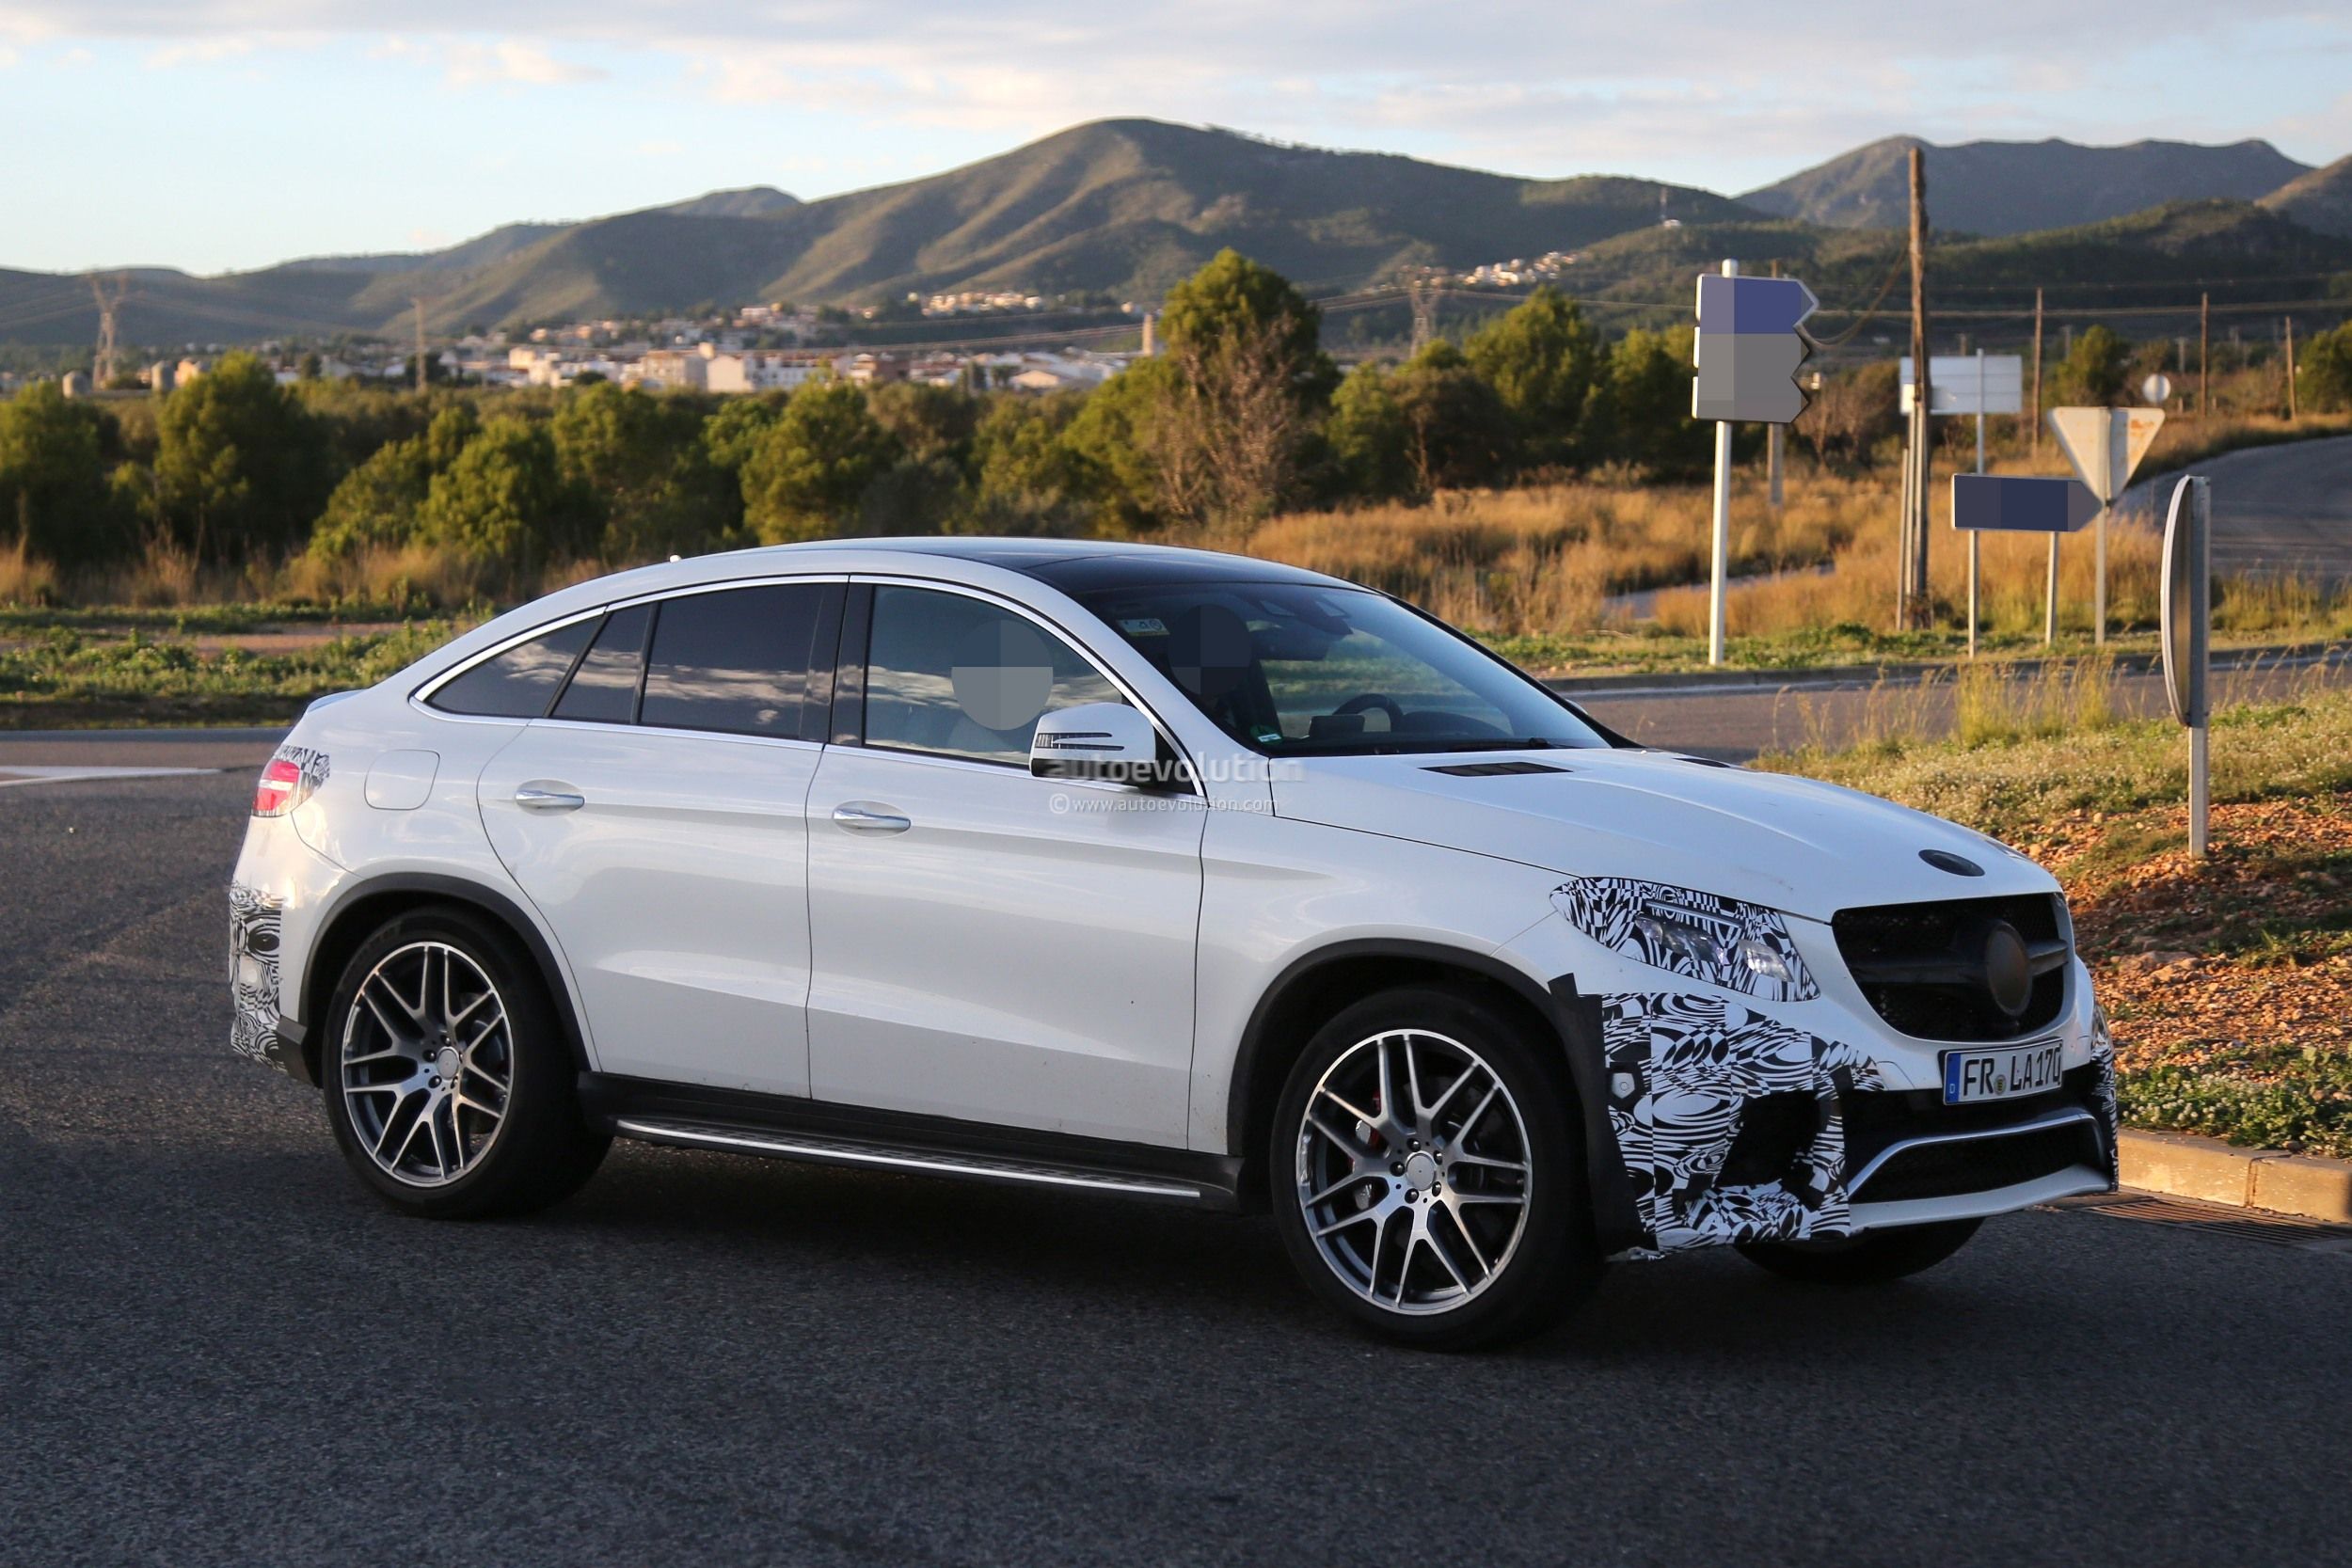 spied in production 2015 mercedes benz gle coupe